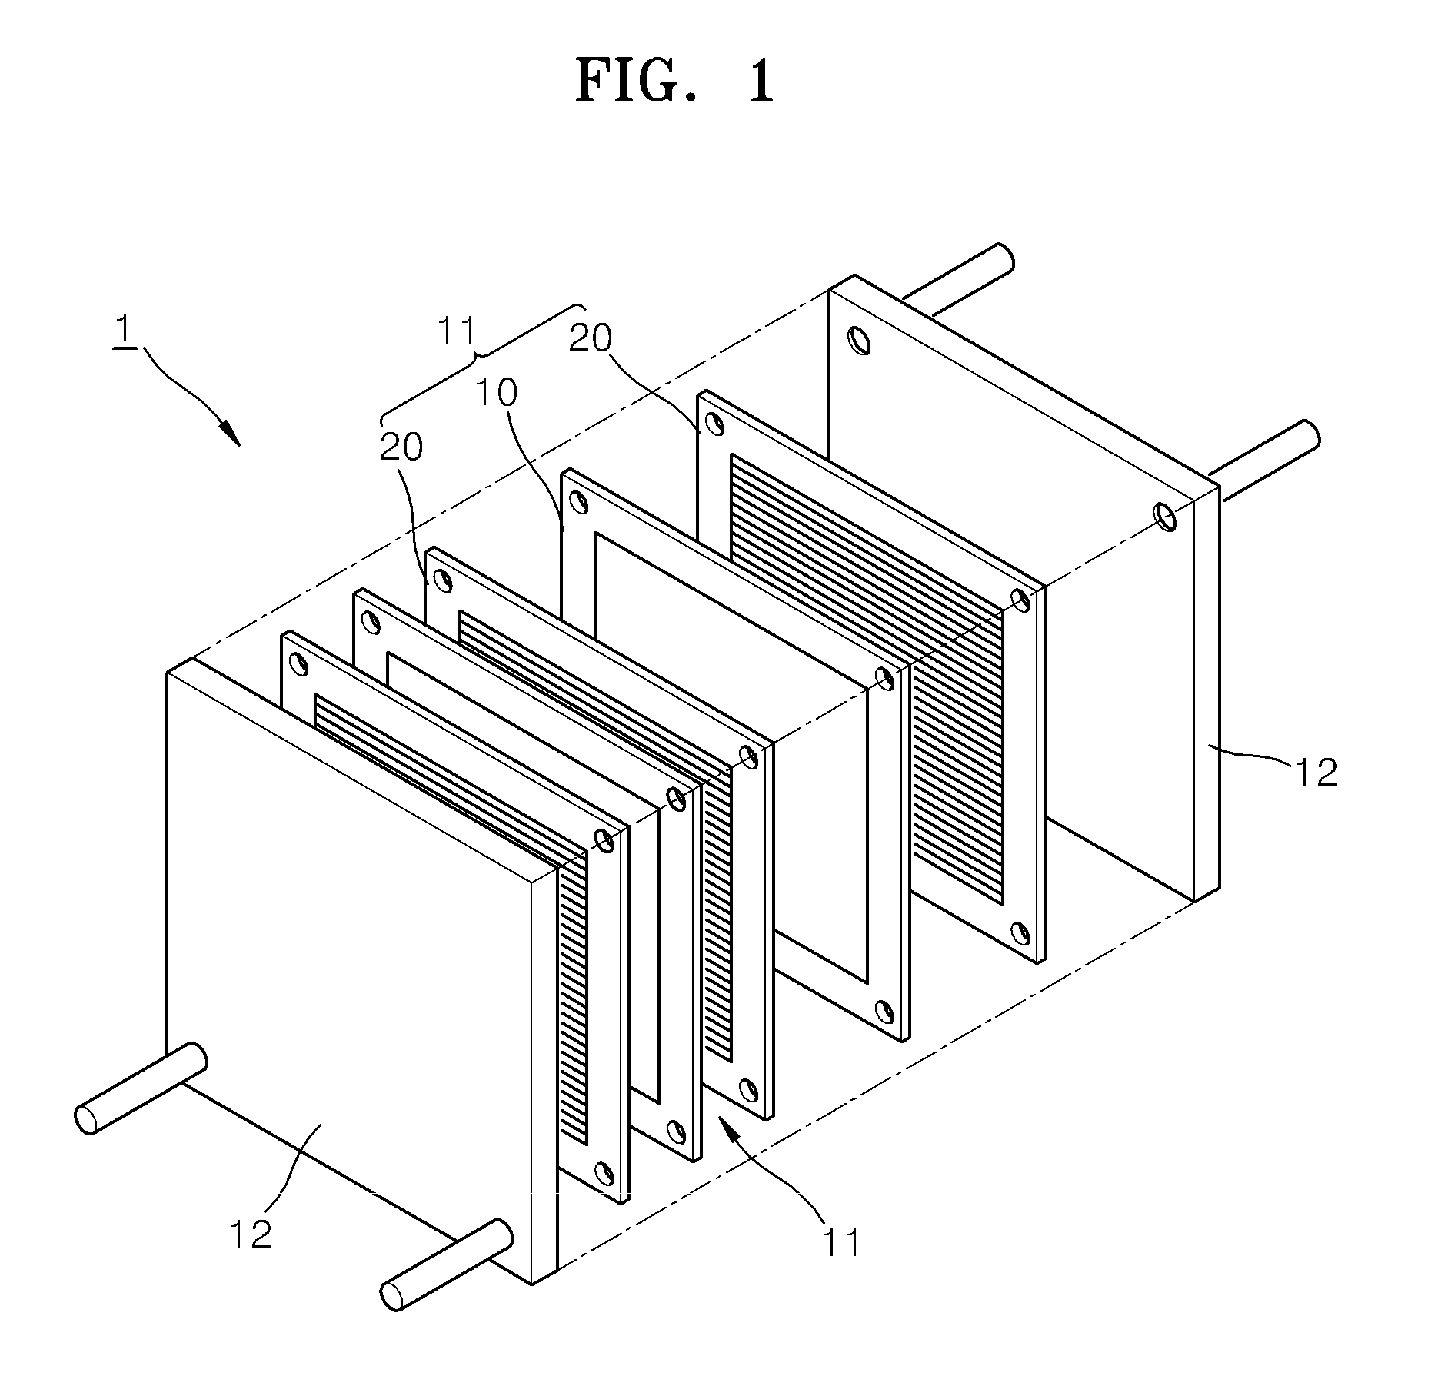 Non-noble metal based catalyst, method of manufacturing the same, fuel cell electrode including the non-noble metal based catalyst, and fuel cell including the non-noble metal based catalyst